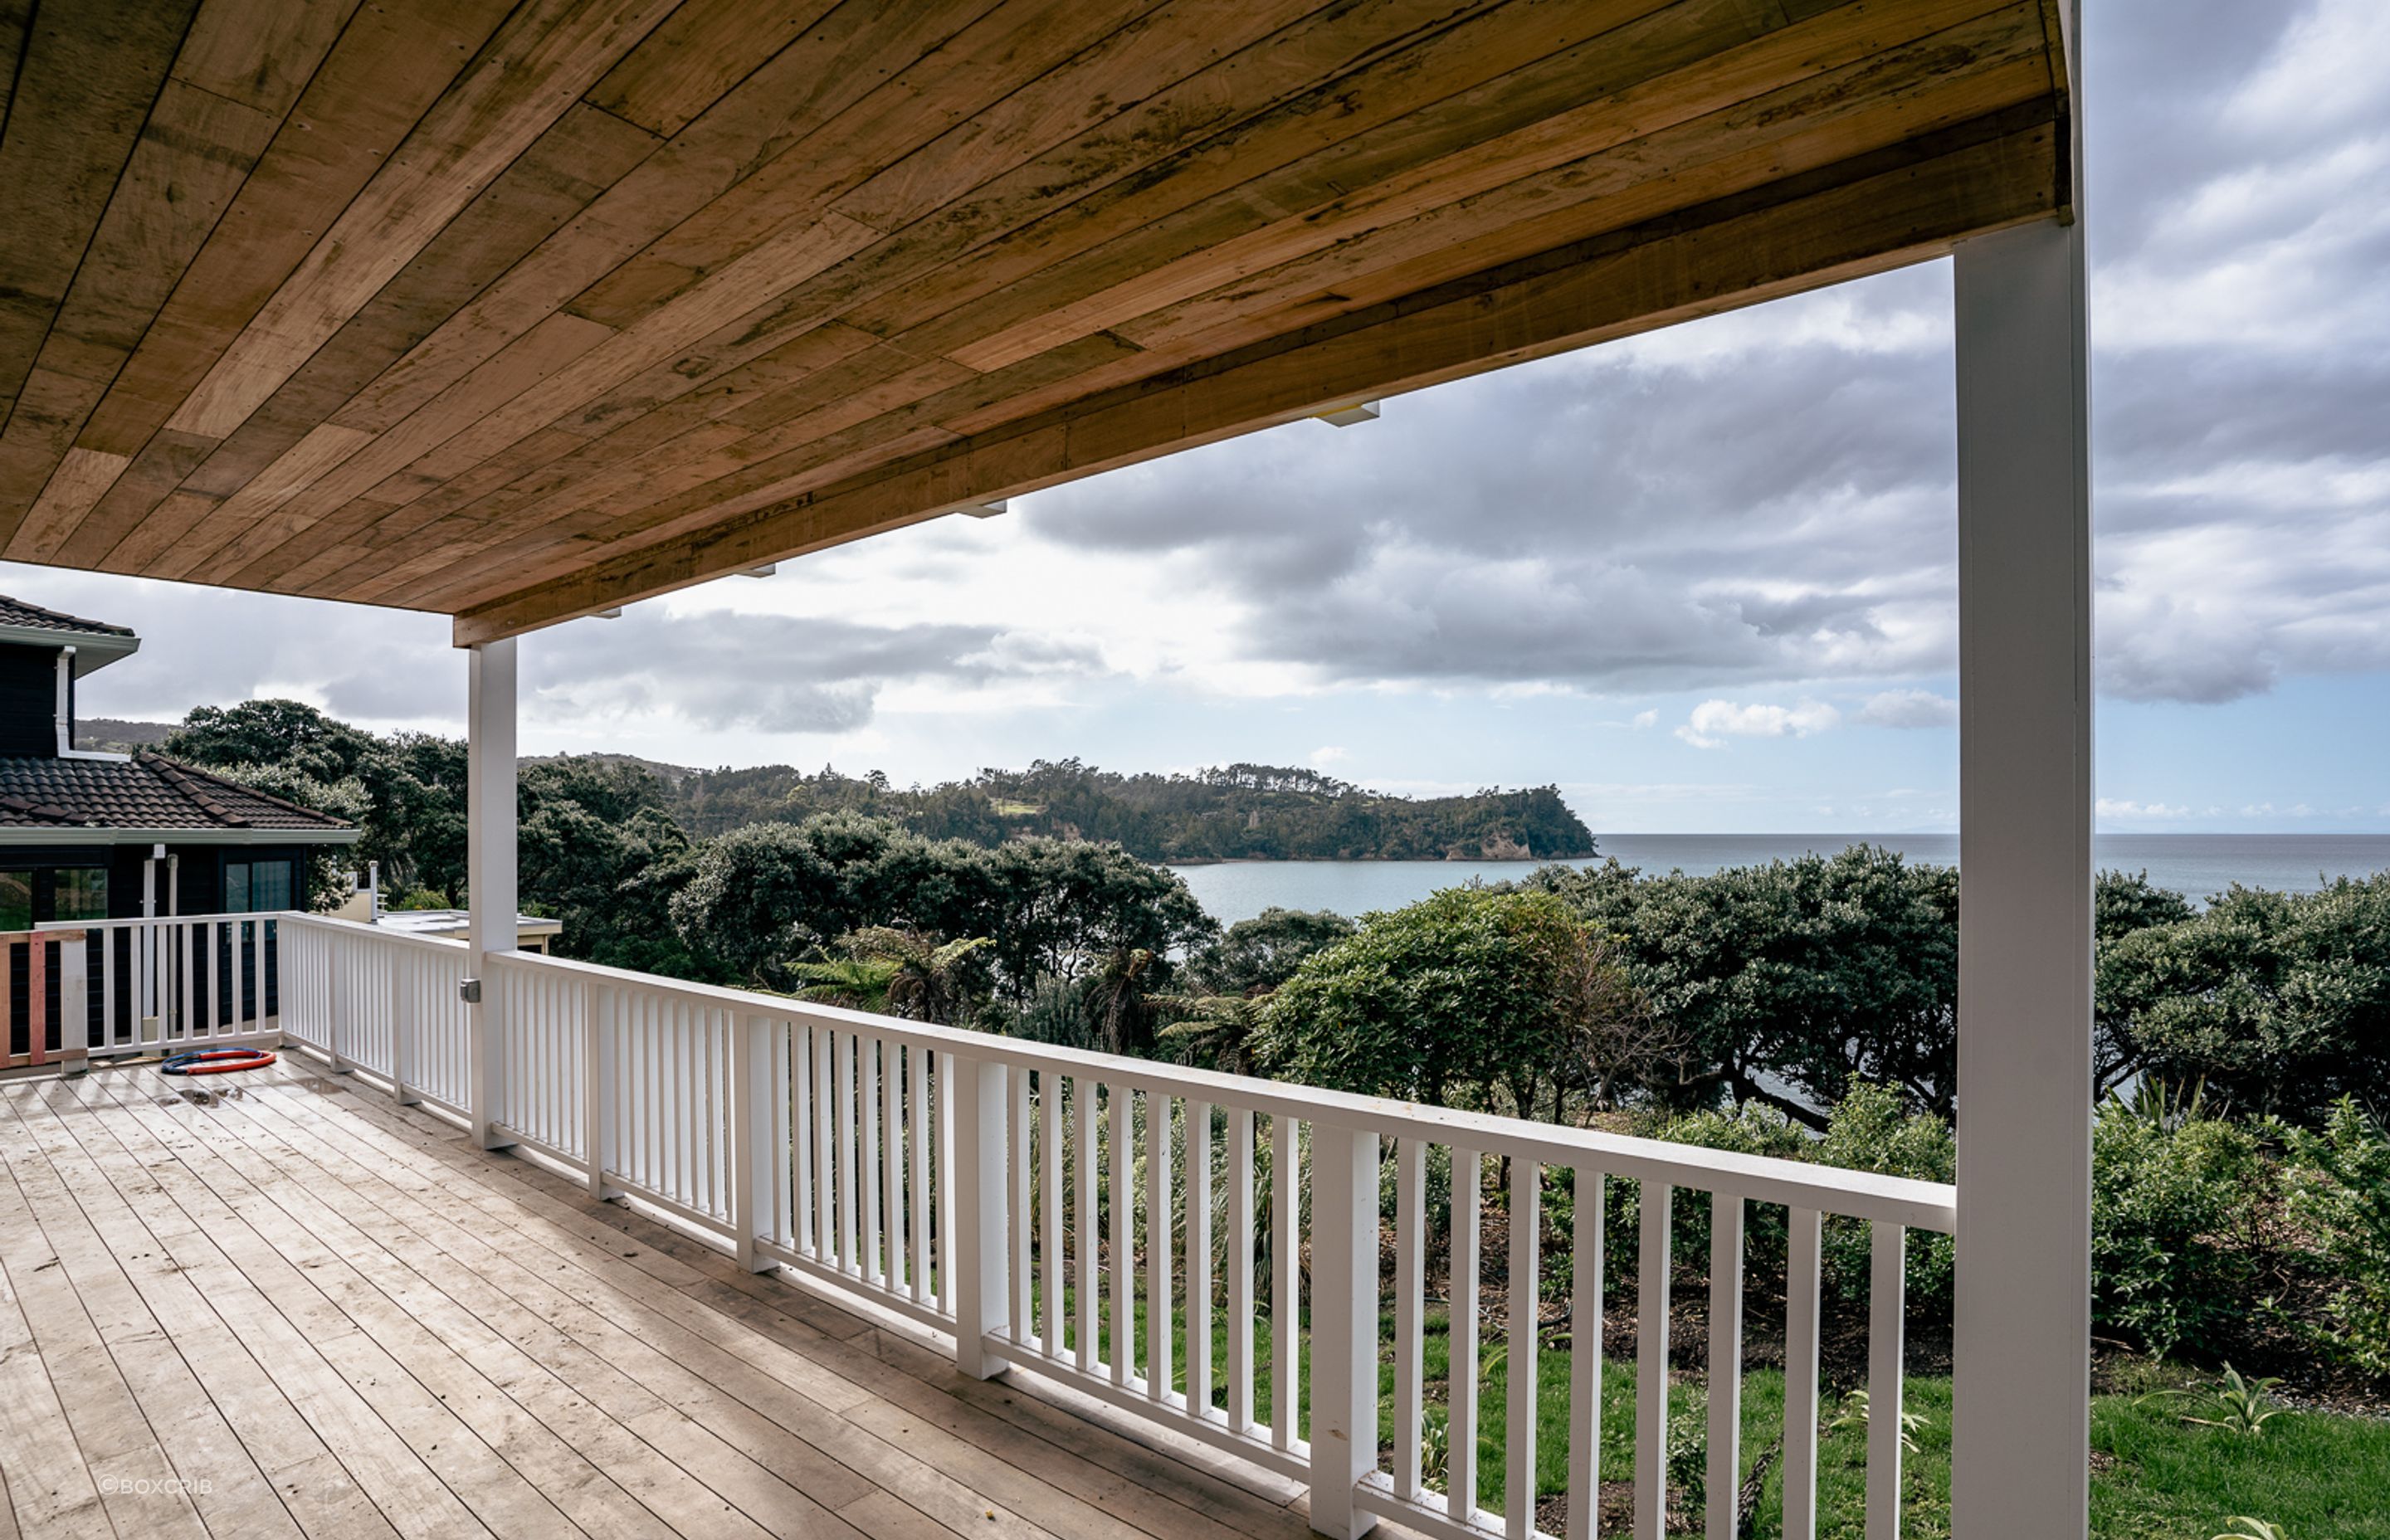 Even the lower level verandah is precisely finished, with the overhang clad in timber, and the balustrade in a Cape Cod style.